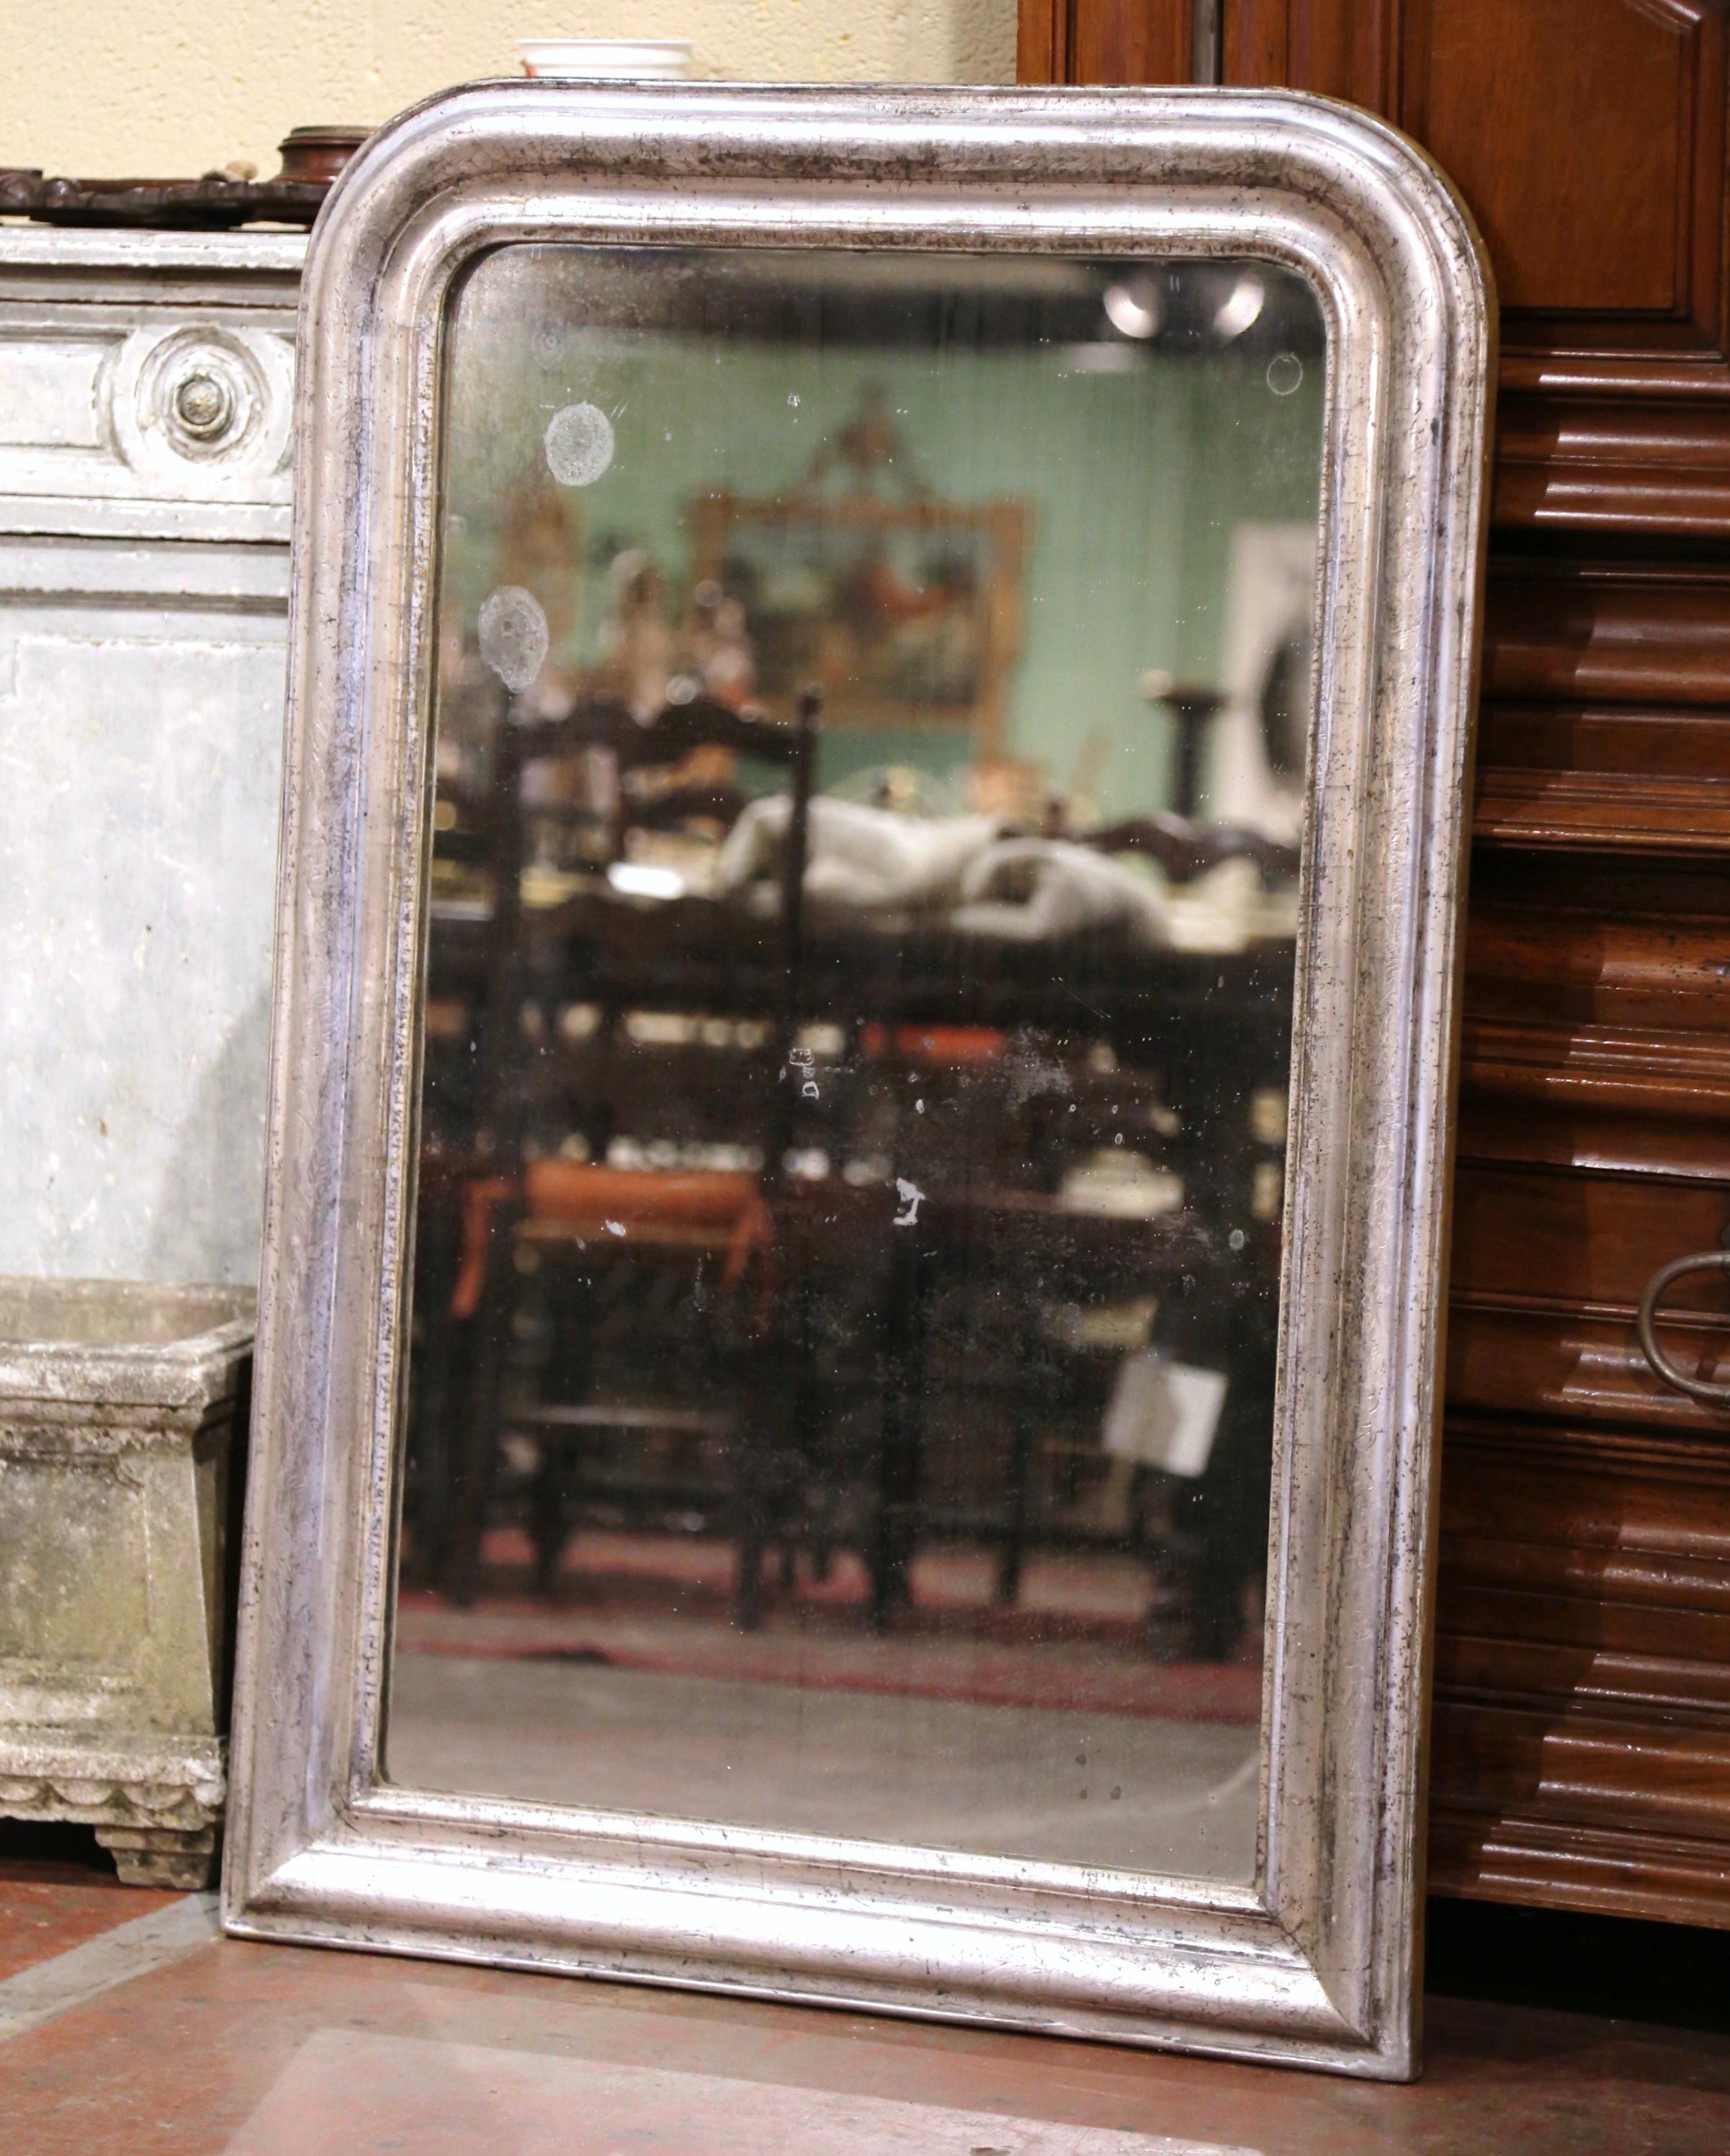 Crafted in the Burgundy region of France, circa 1870, the rectangular antique mirror has traditional, timeless lines with rounded corners. The frame is decorated with a luxurious silver leaf finish over discrete engraved floral motifs. The classic